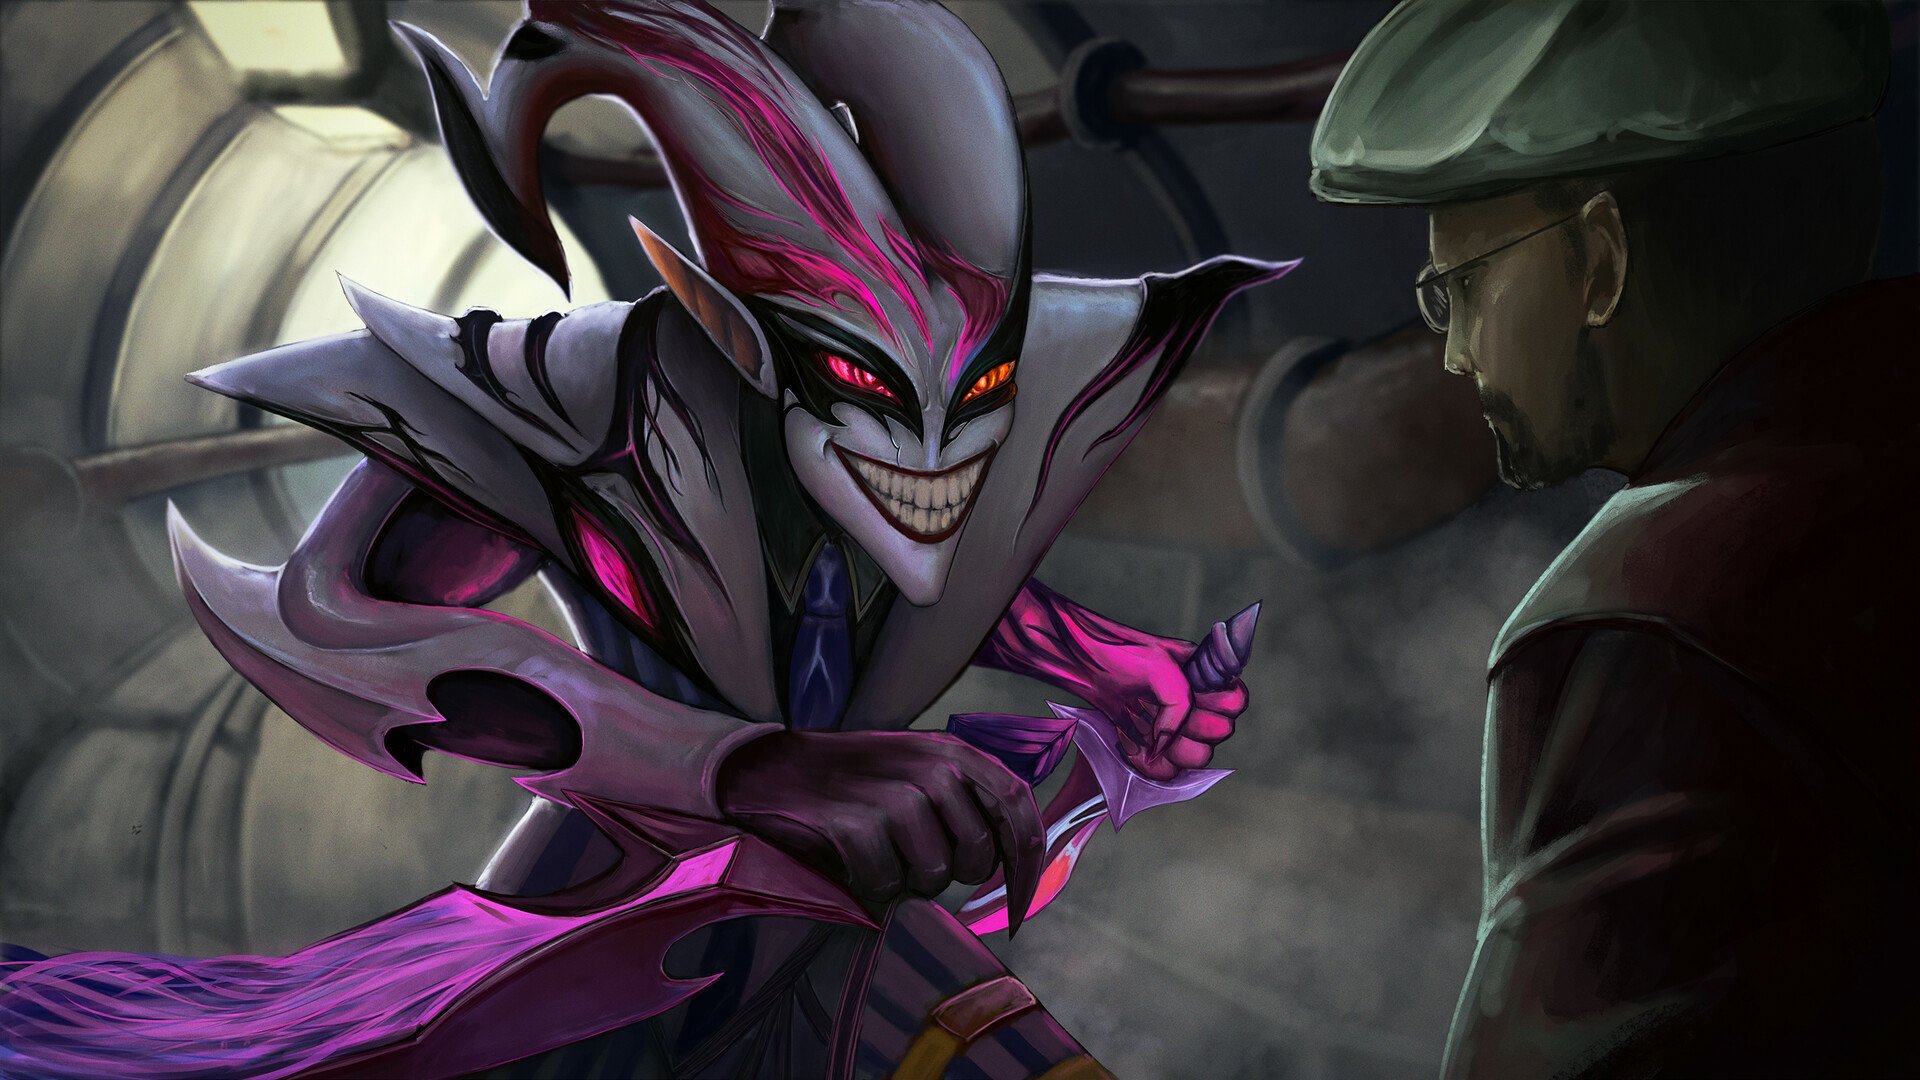 HD League of Legends wallpaper featuring Shaco, the mischievous jester character from the popular video game.